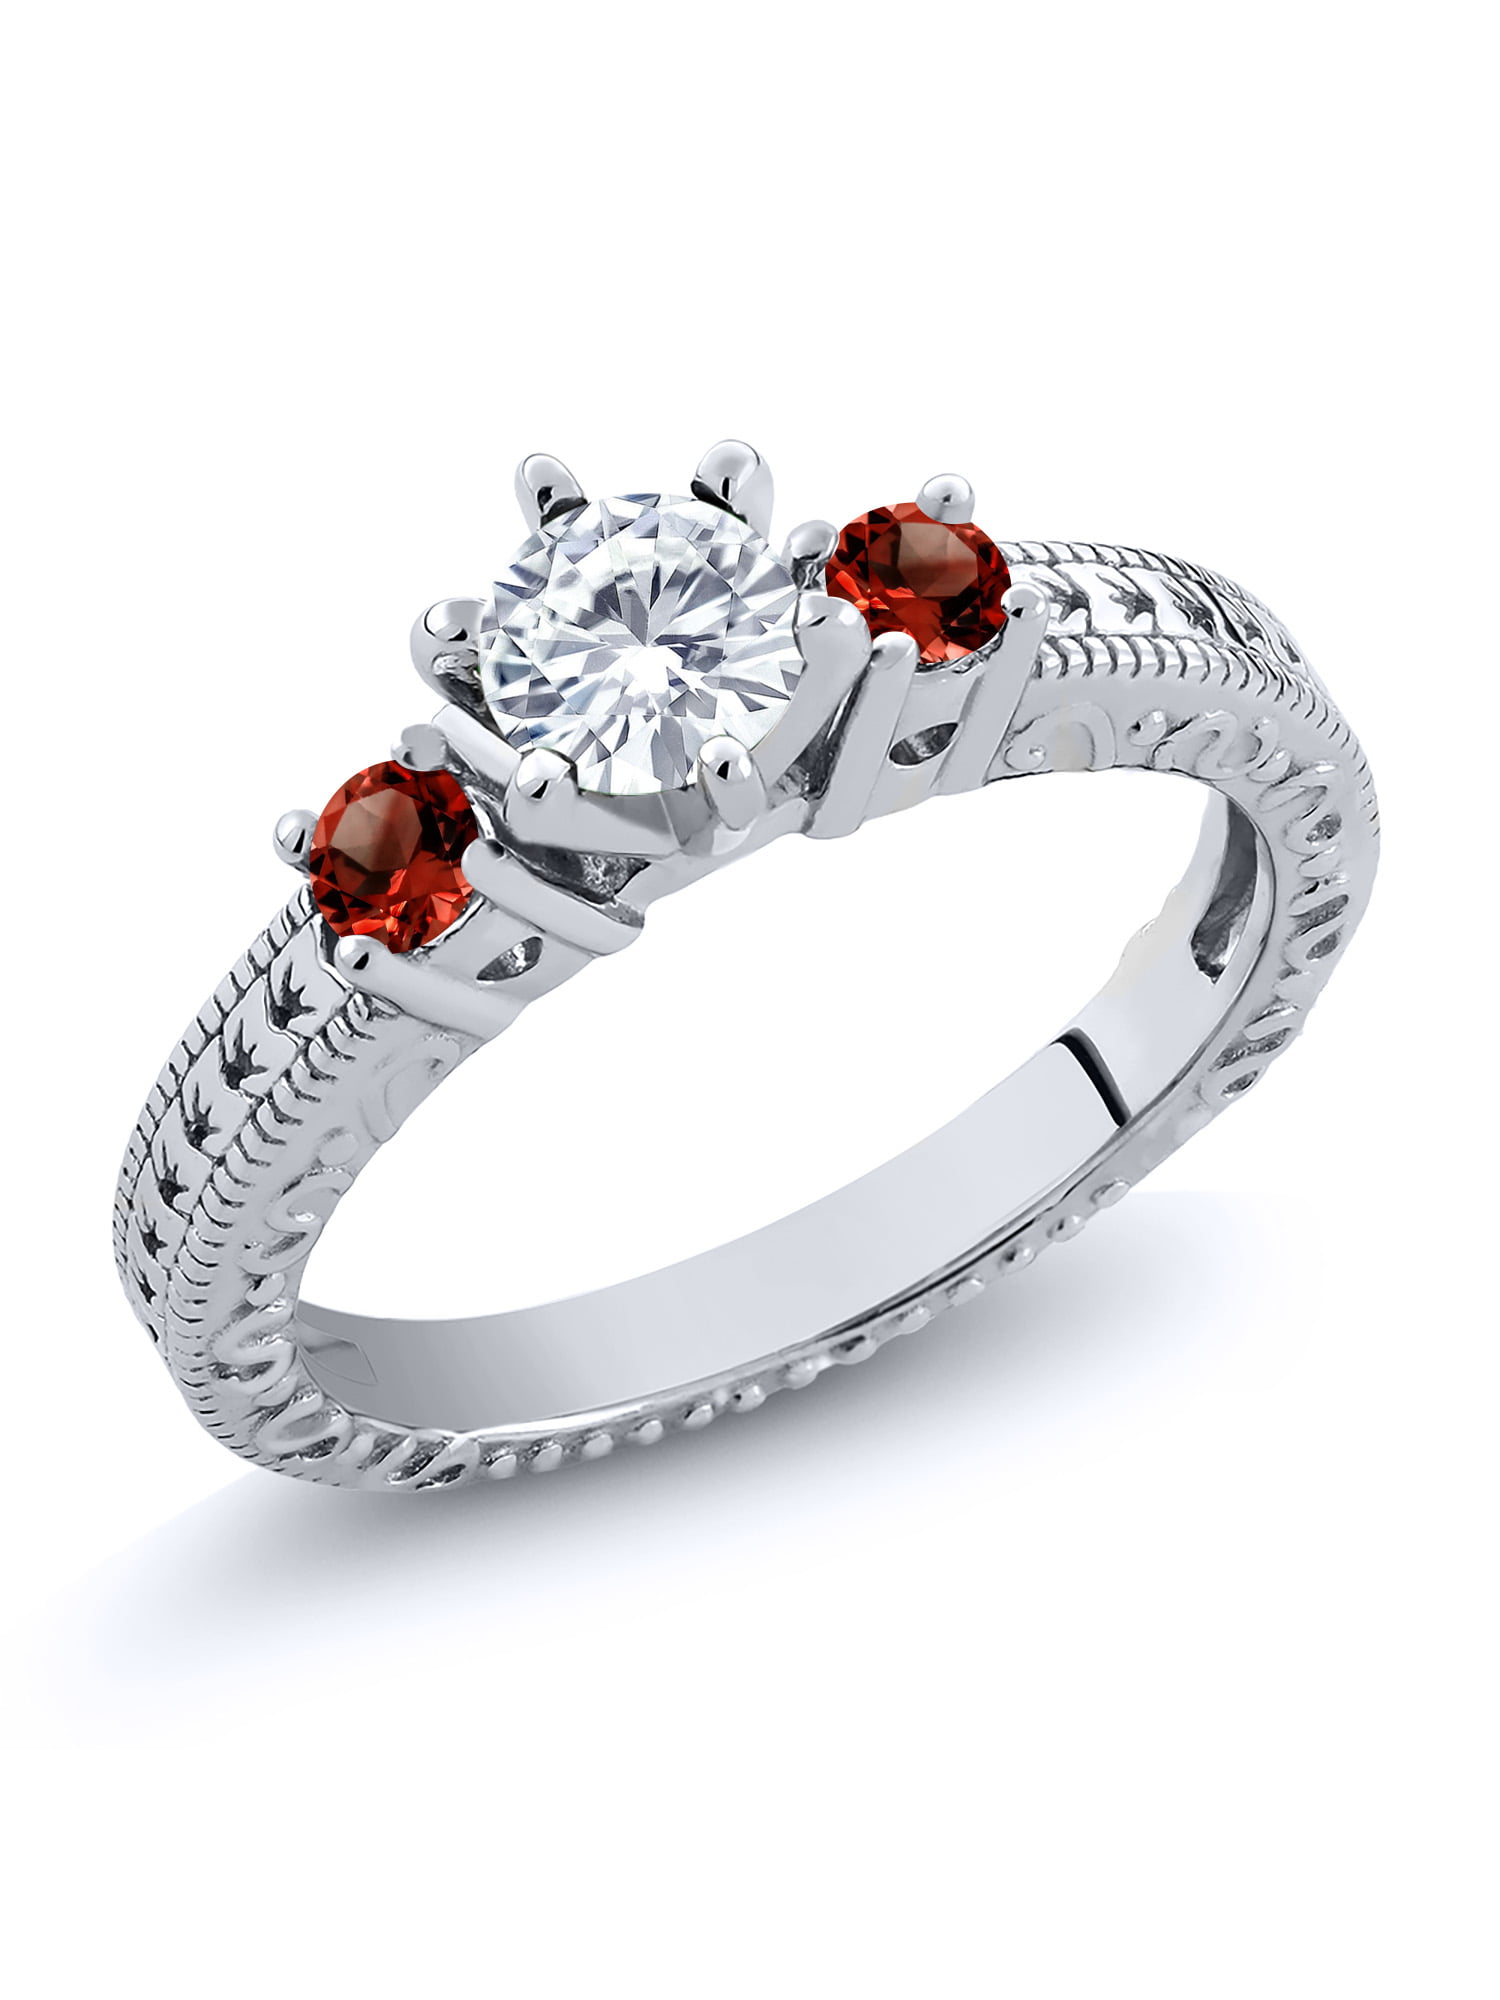 925 Sterling Silver Rose Garnet 5 Stone Ring Gift Jewelry for Women Cttw 2.7 